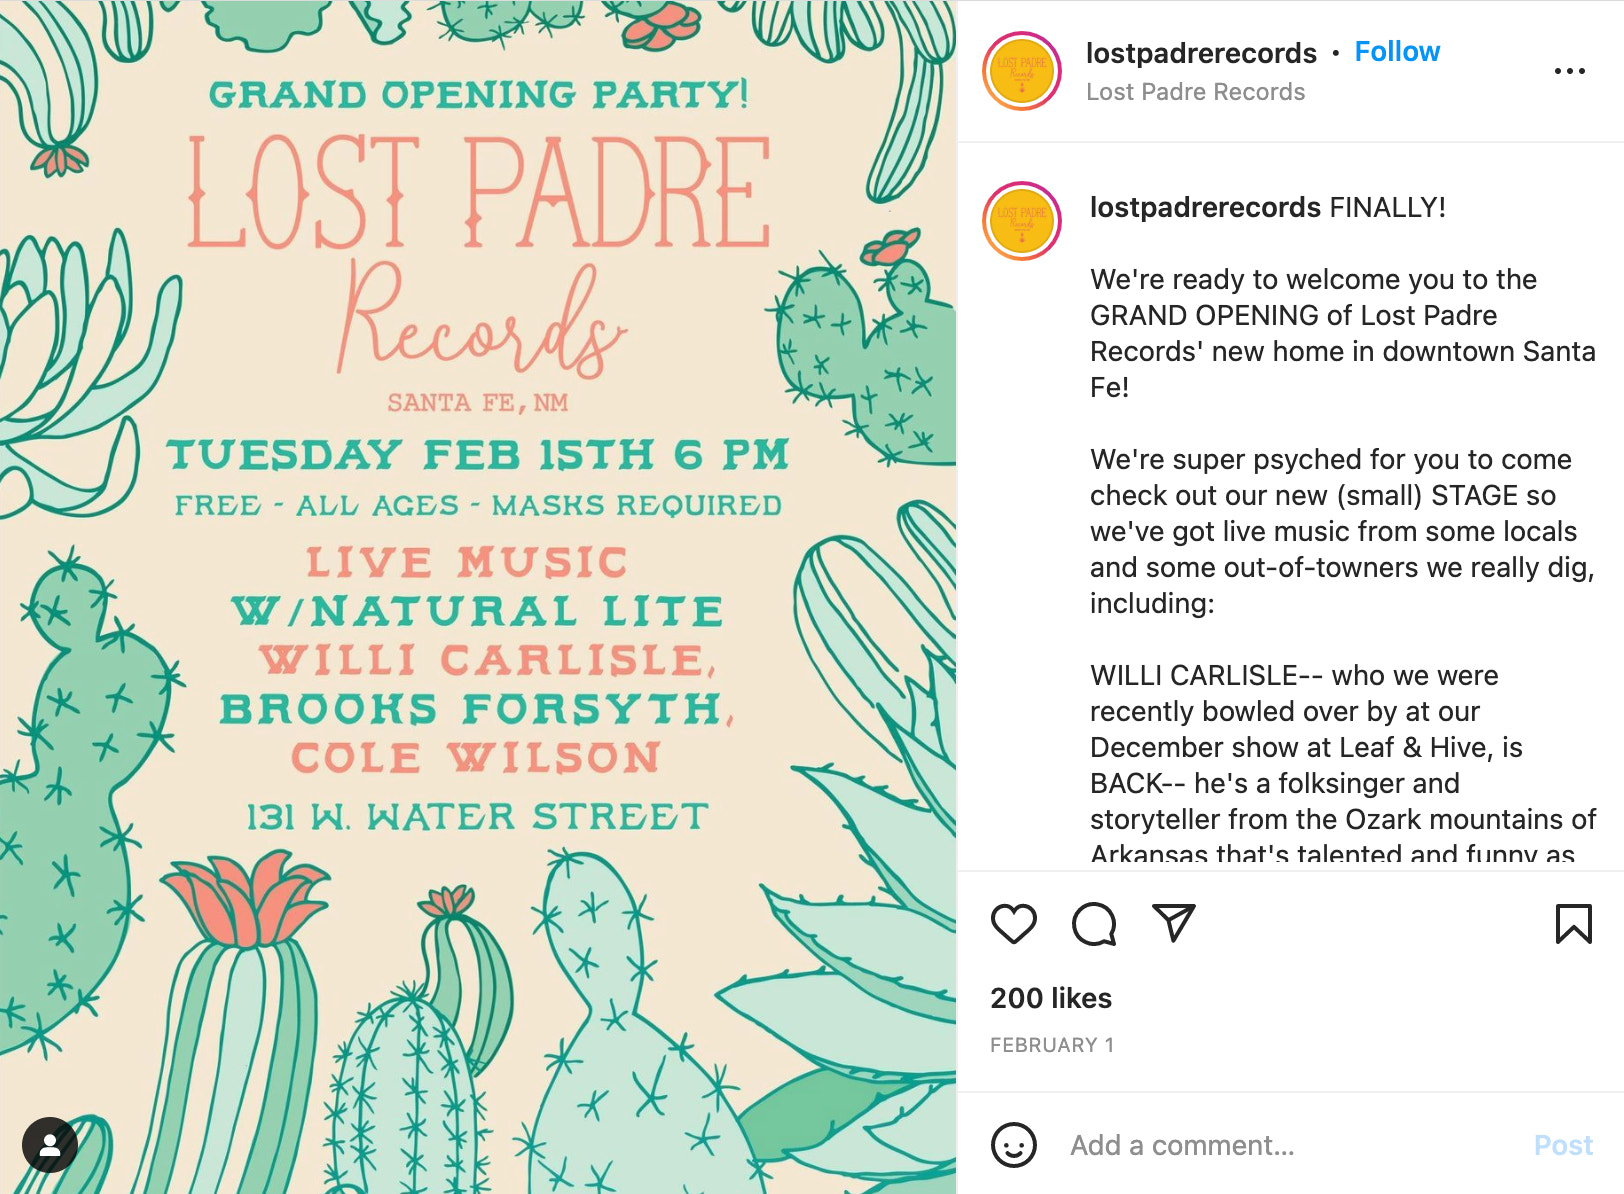 Screen grab of an instagram post by Lost Padre records advertising a grand opening event 